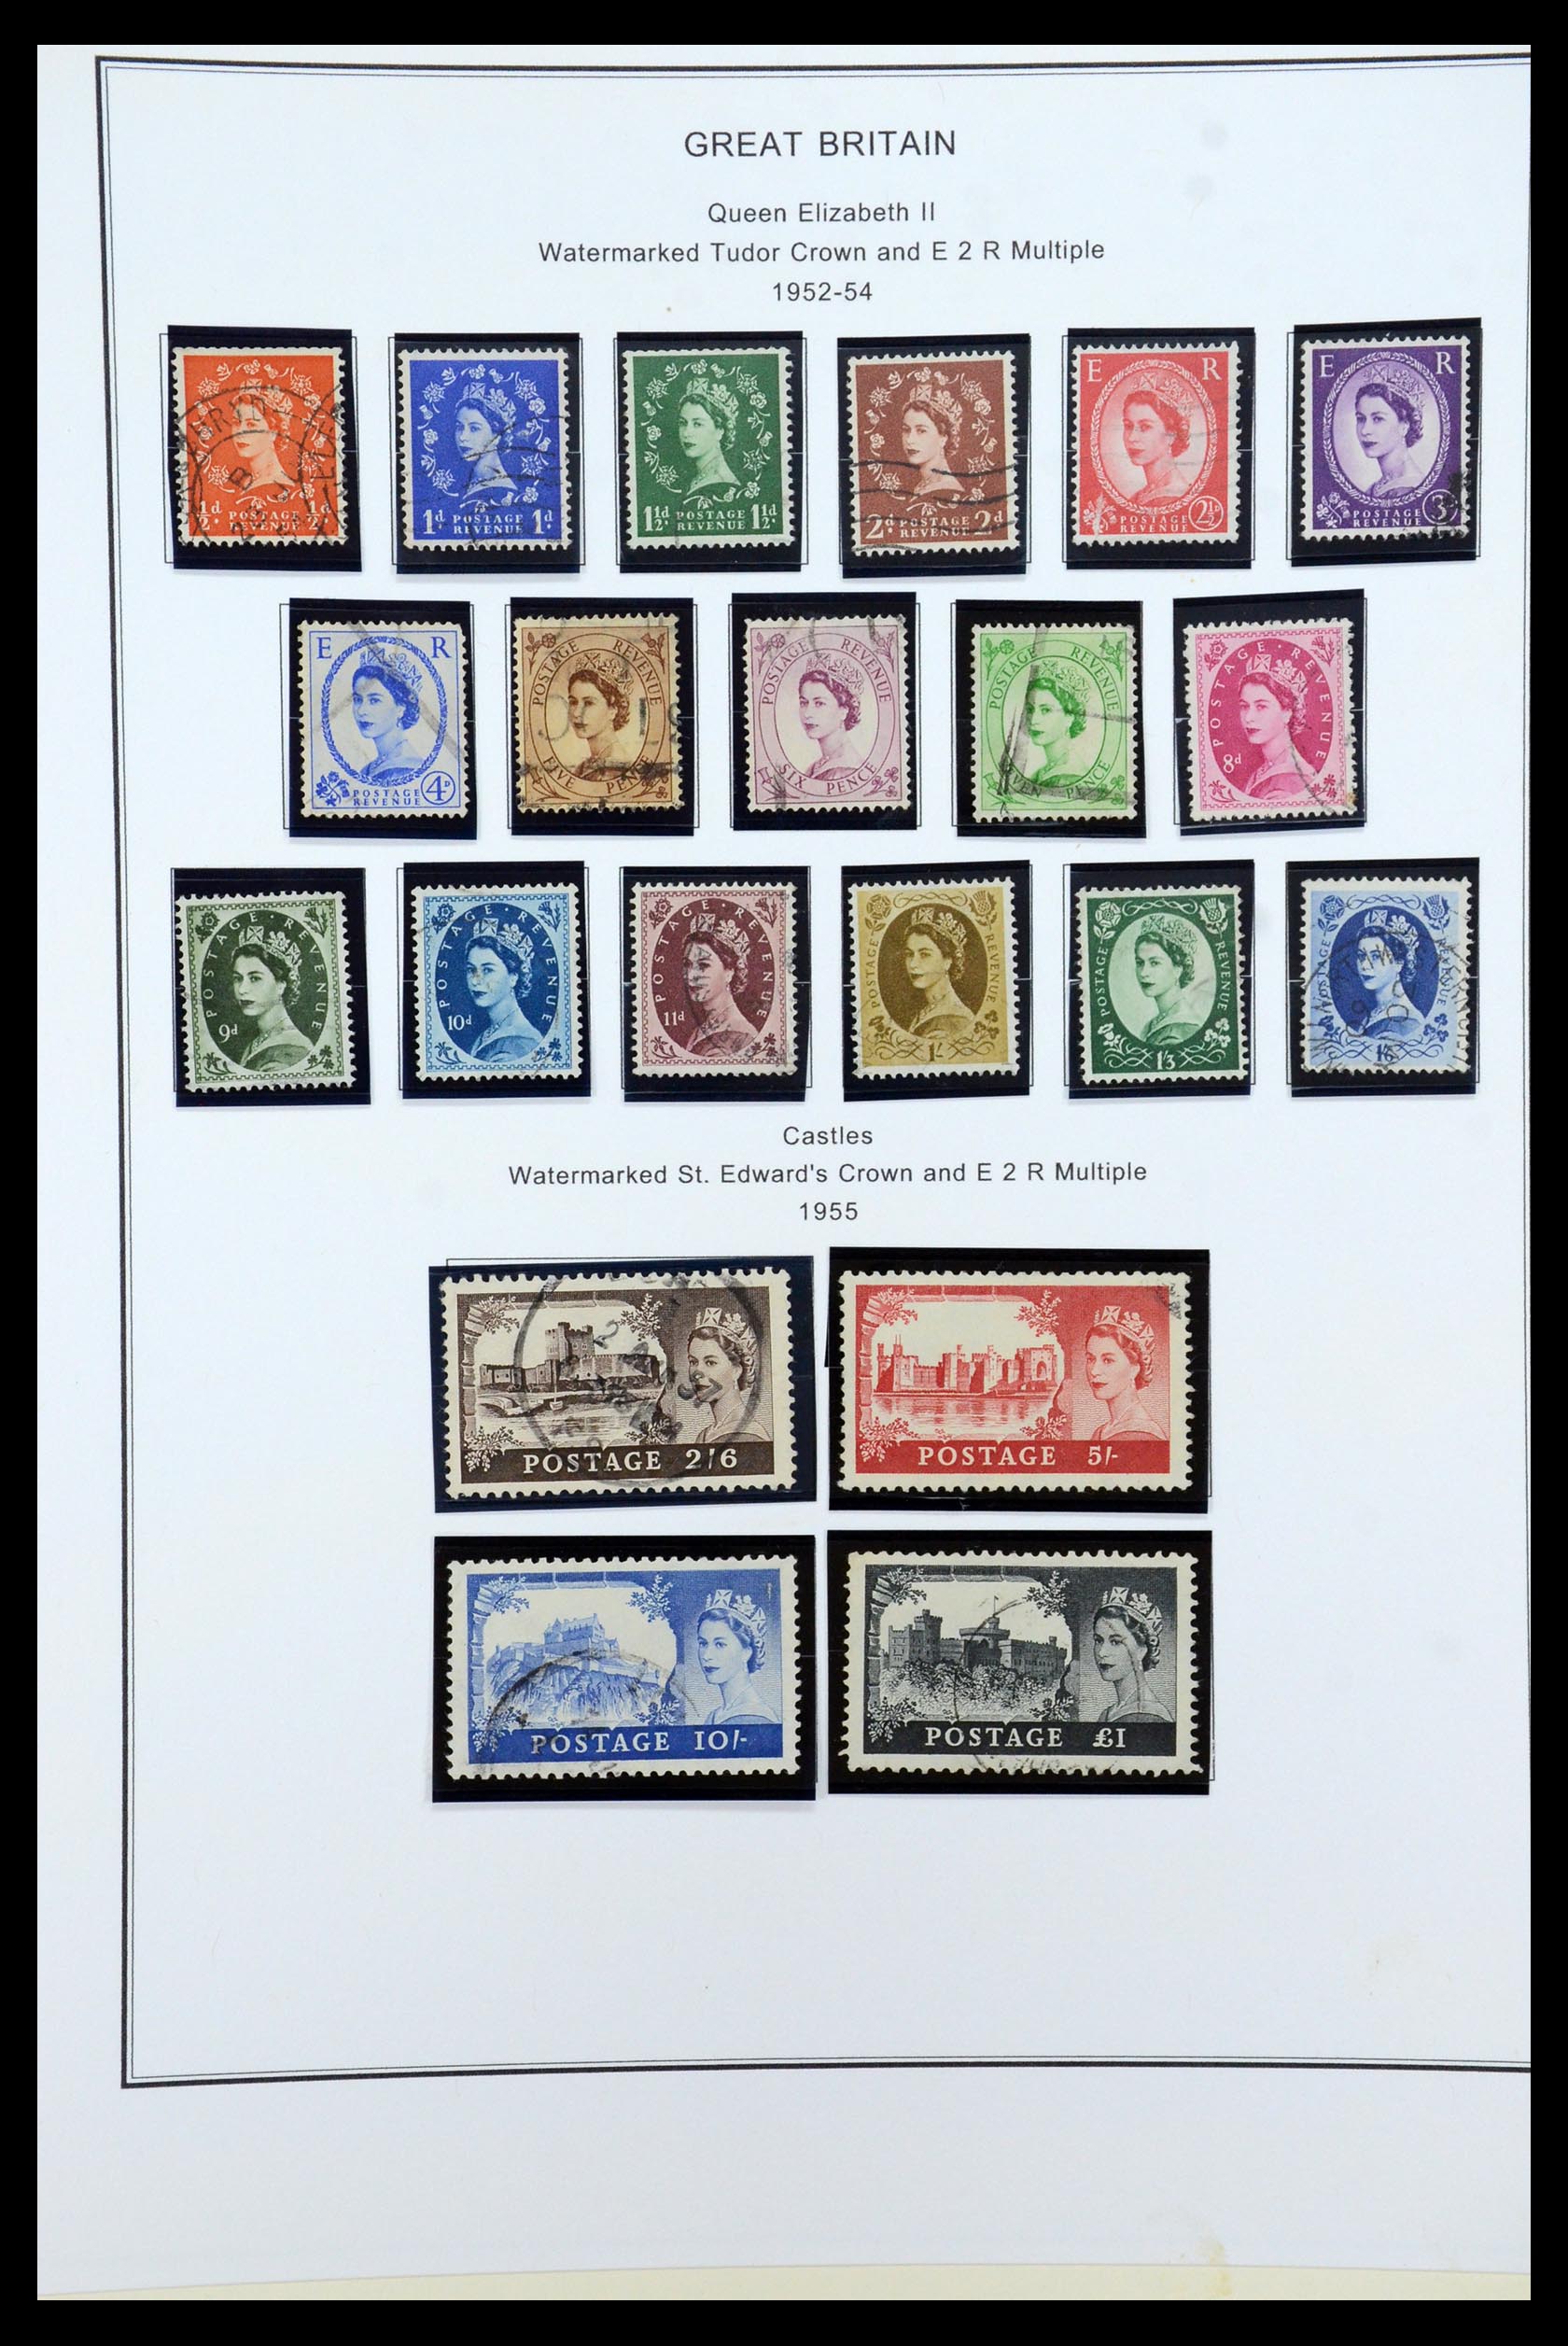 36311 014 - Stamp collection 36311 Great Britain 1840-1972.